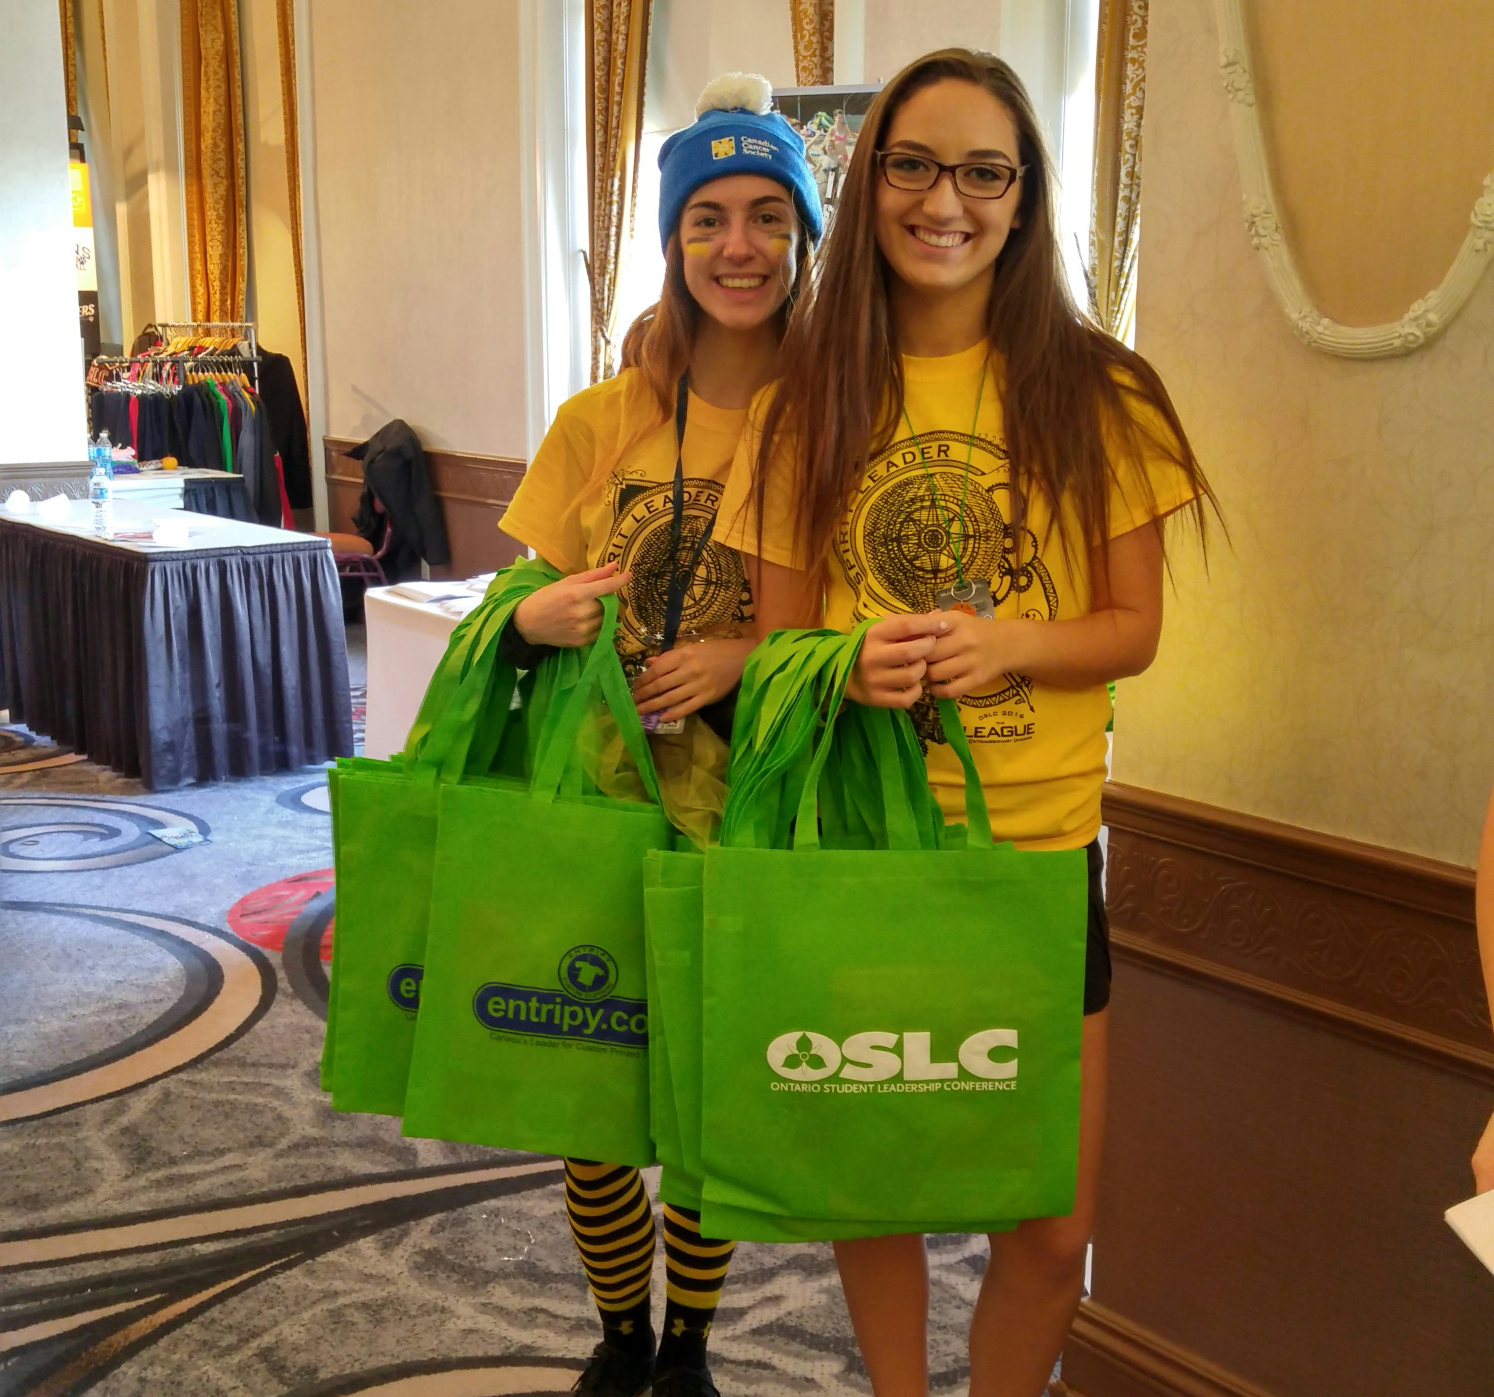 Students wearing custom t-shirts, embroidered toques and displaying custom printed totes.